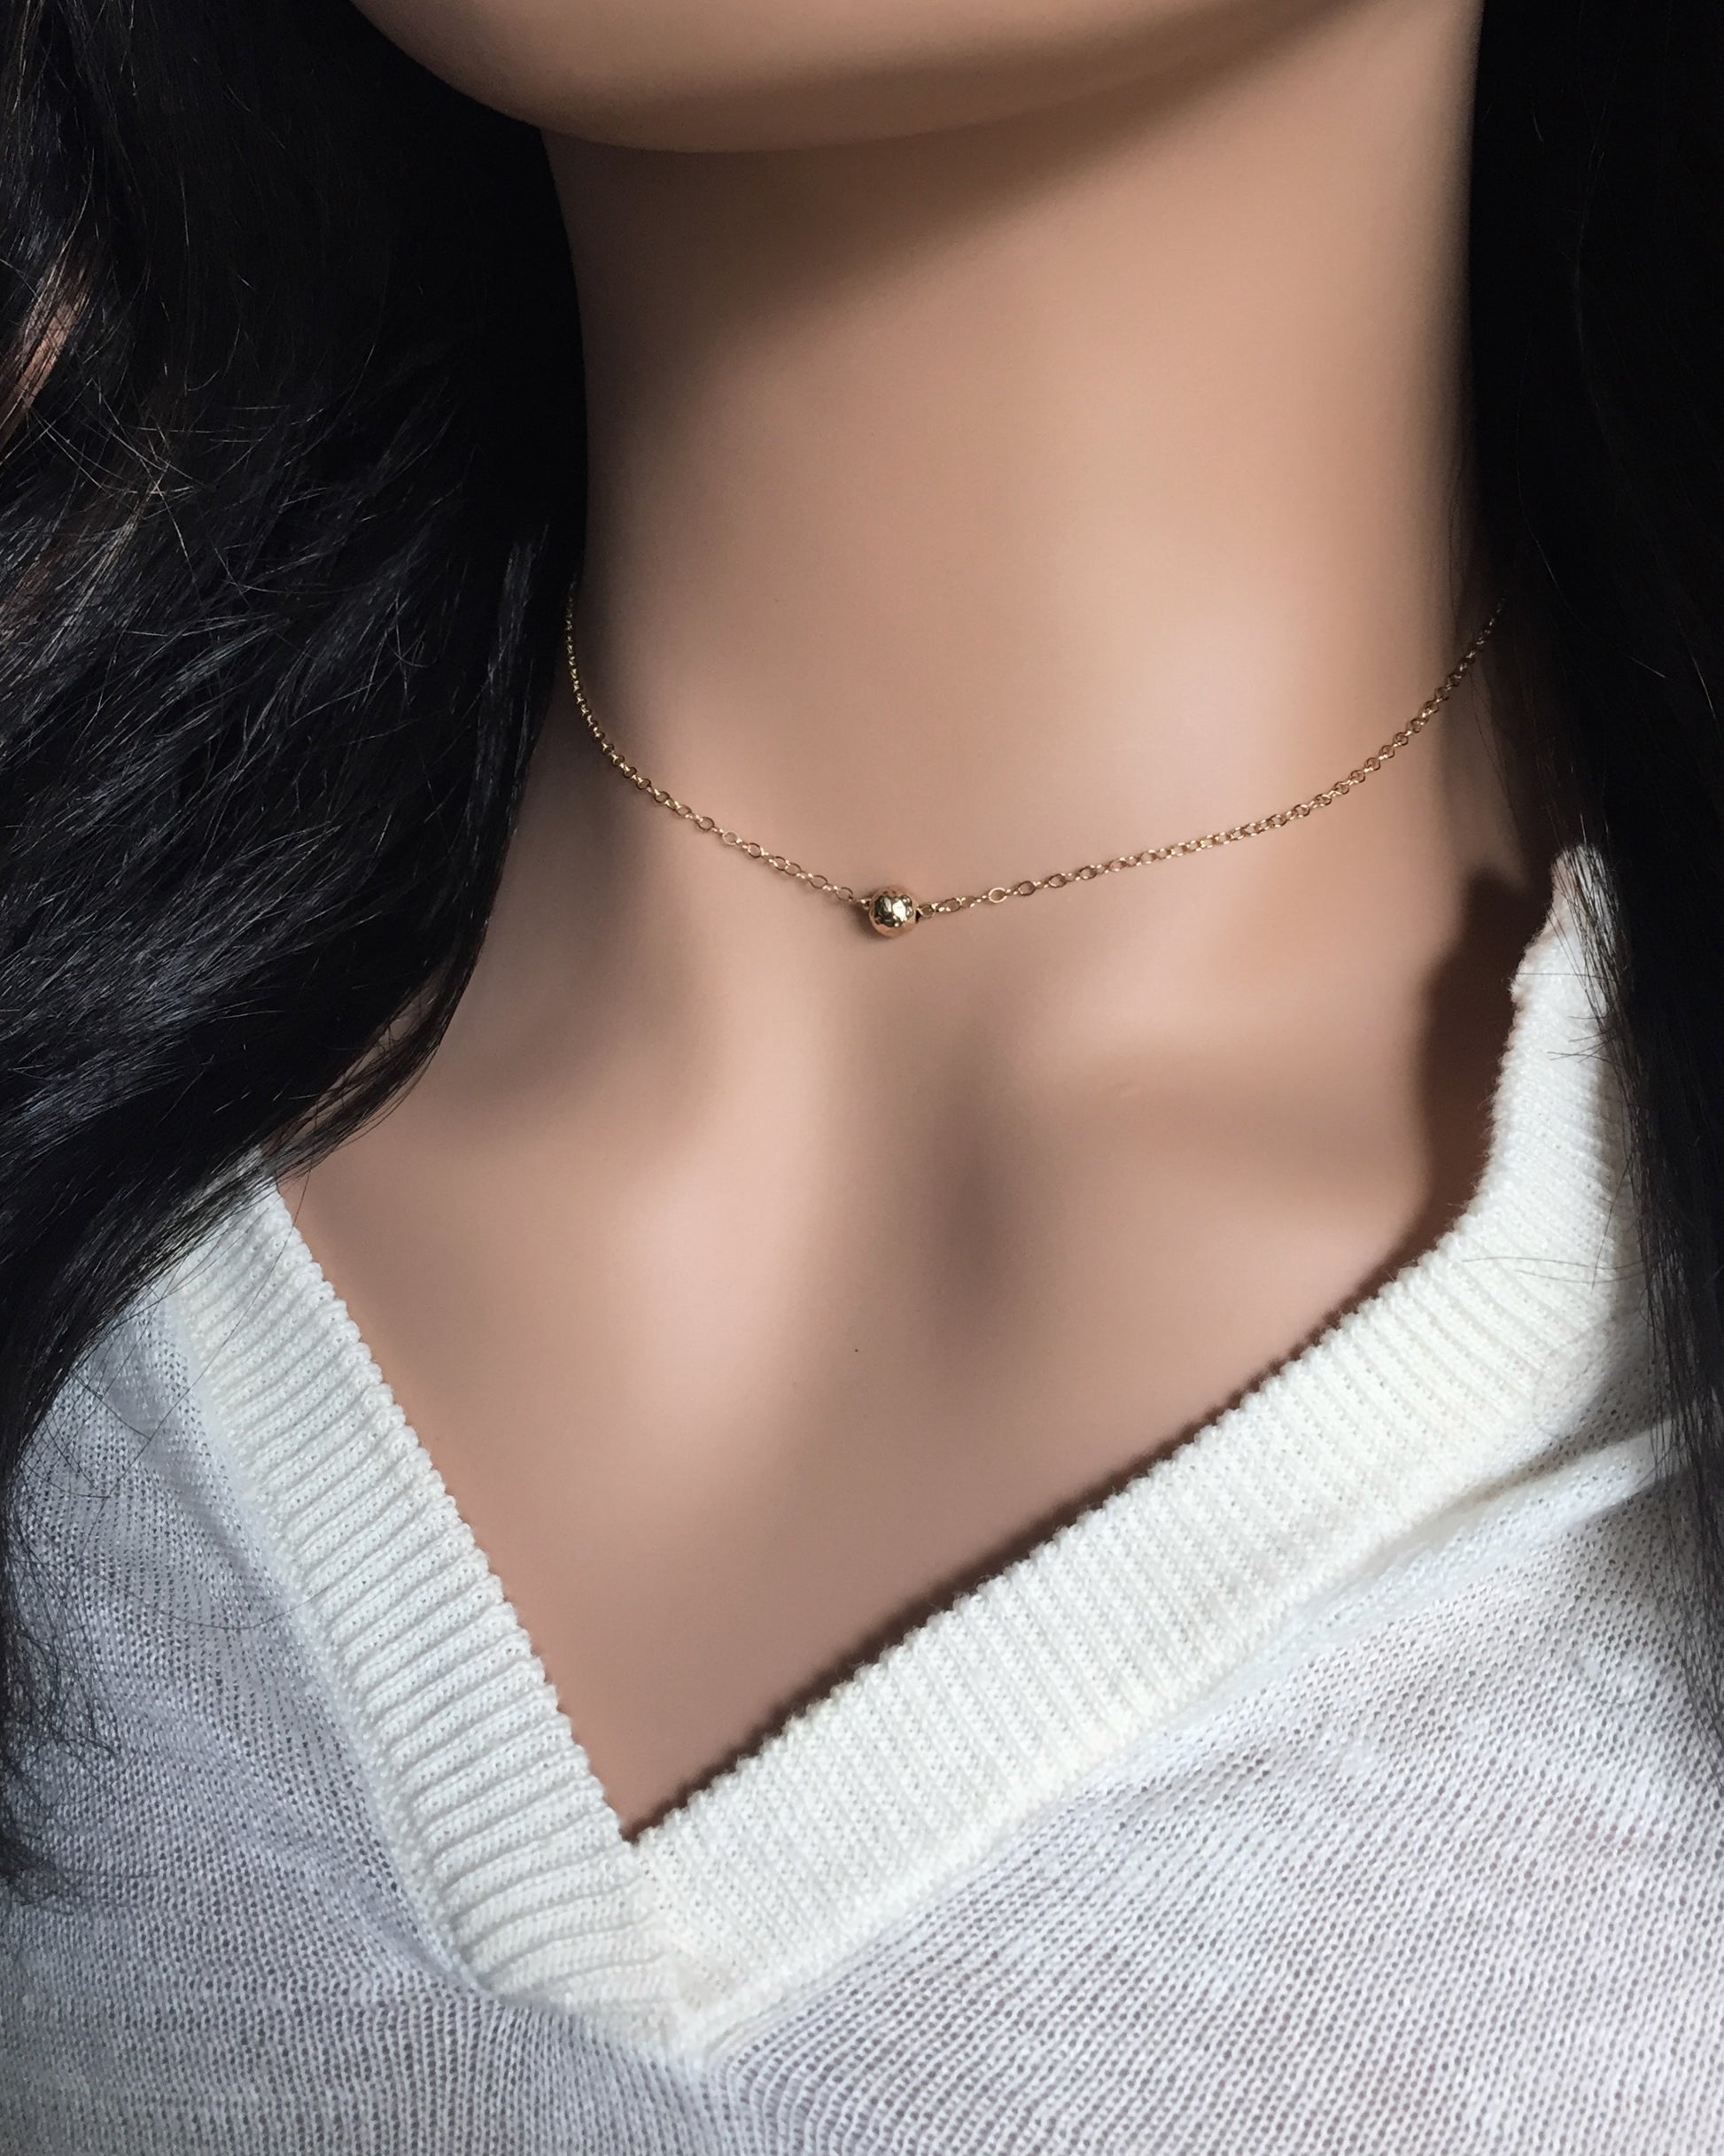 Simple Tiny Ball Necklace | Small Dainty Necklace | IB Jewelry